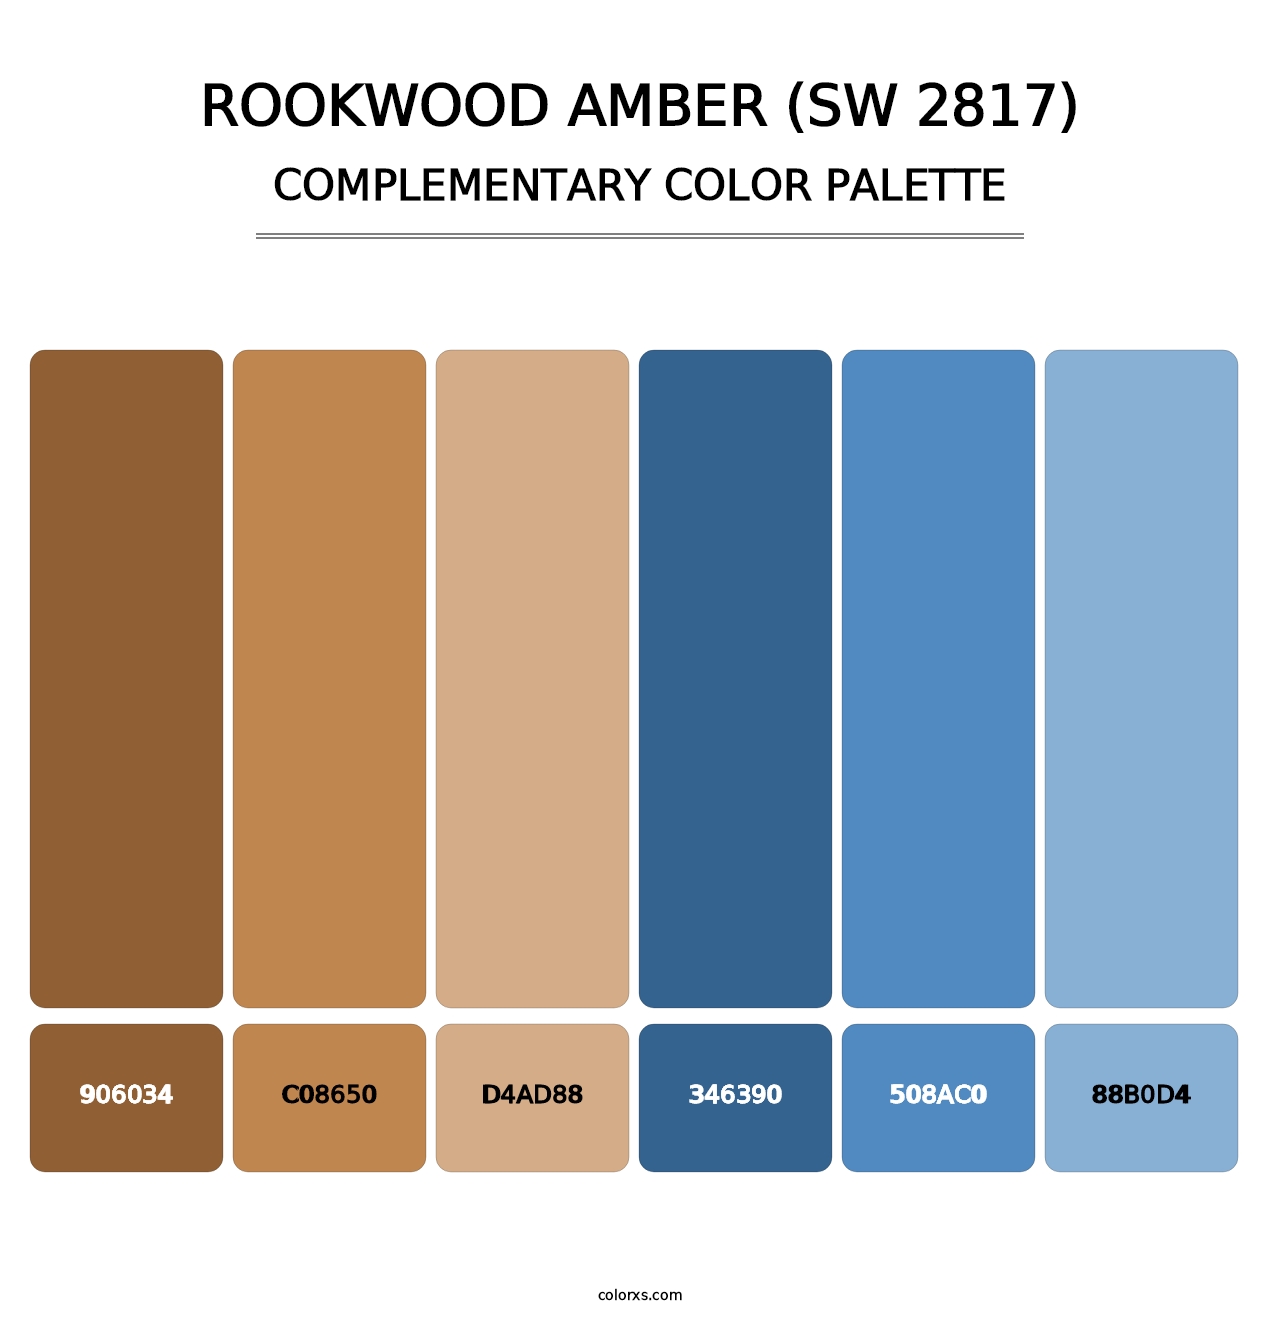 Rookwood Amber (SW 2817) - Complementary Color Palette